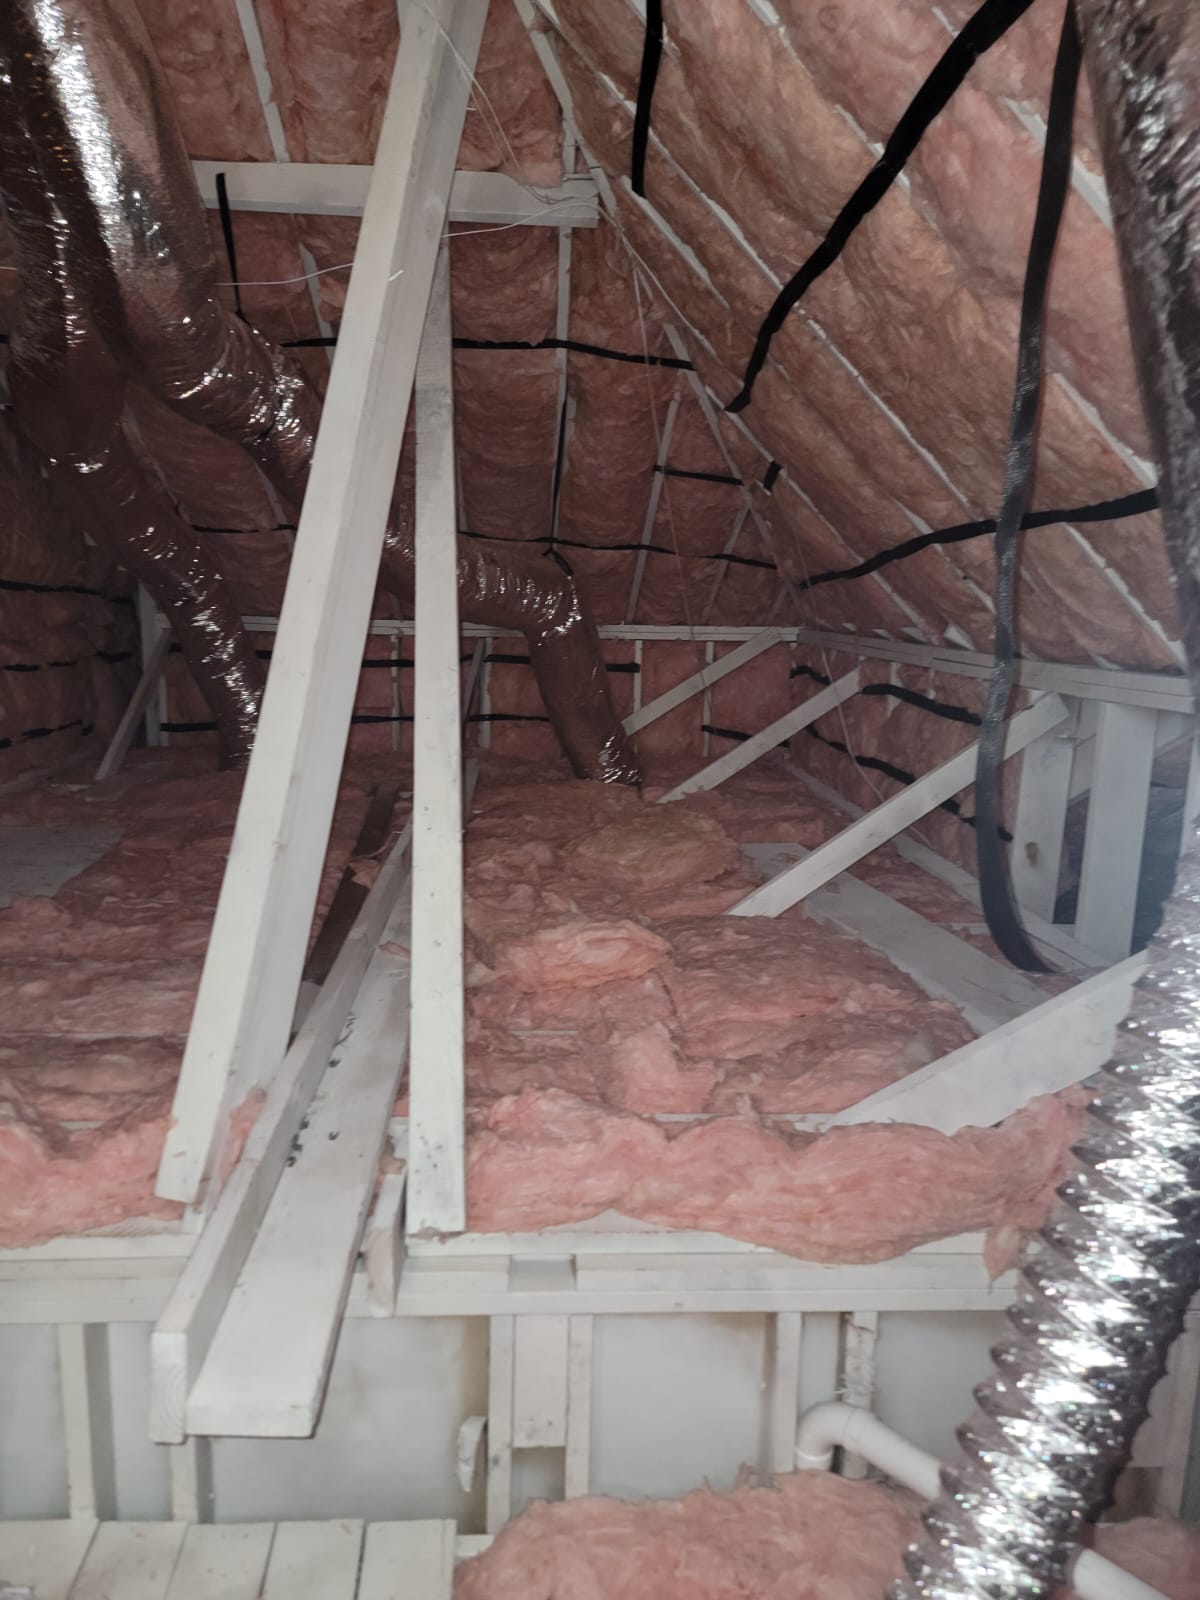 Attic space after wood treatment and paint and after installation of r-38 batt insulation after cleaning